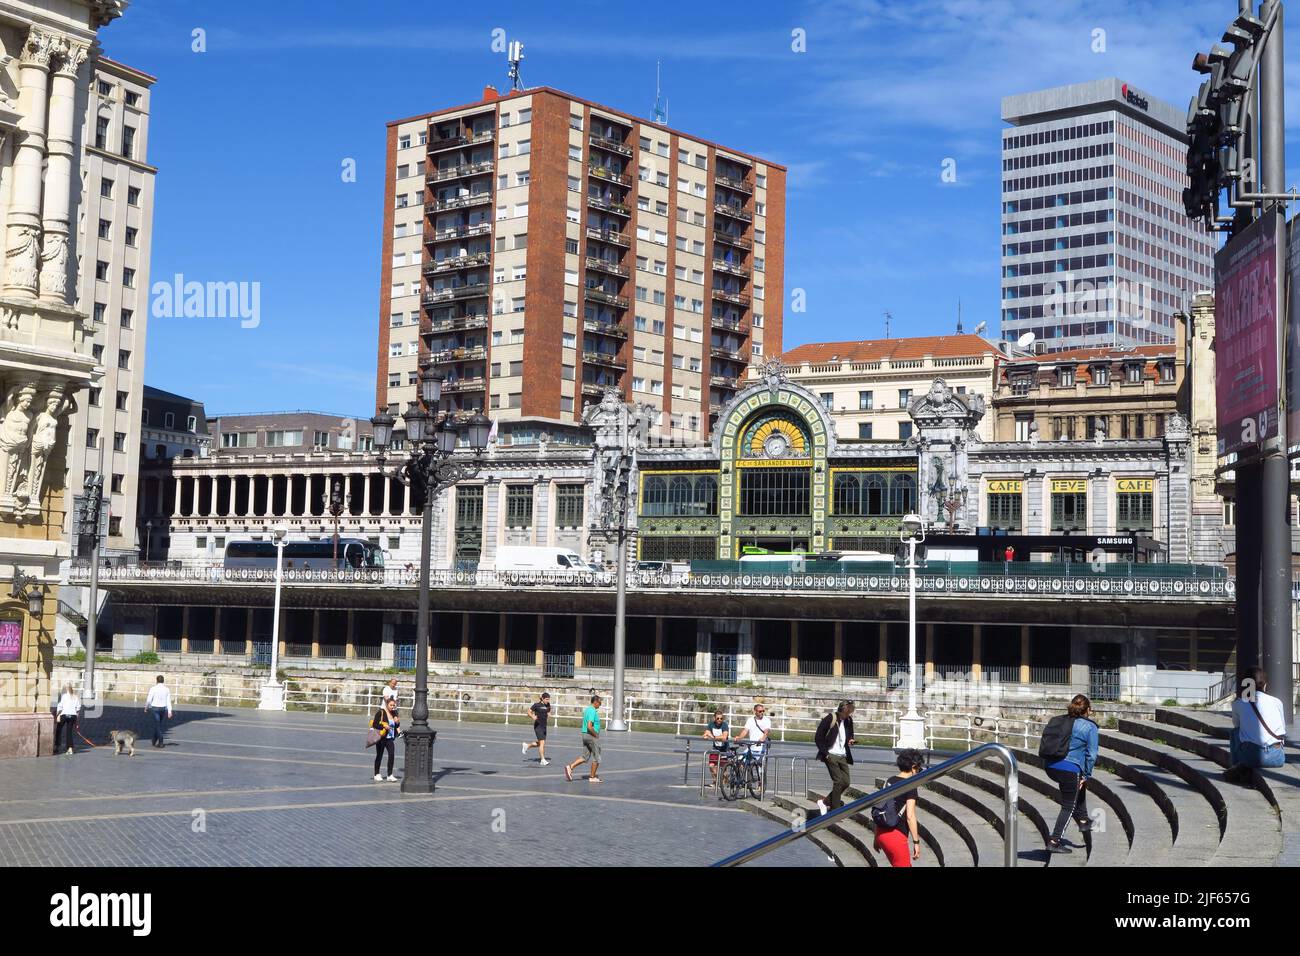 Frontage of La Concordia Station in Bilbao, Spain as viewed from the opposite bank of the Rio de Bilbao Stock Photo